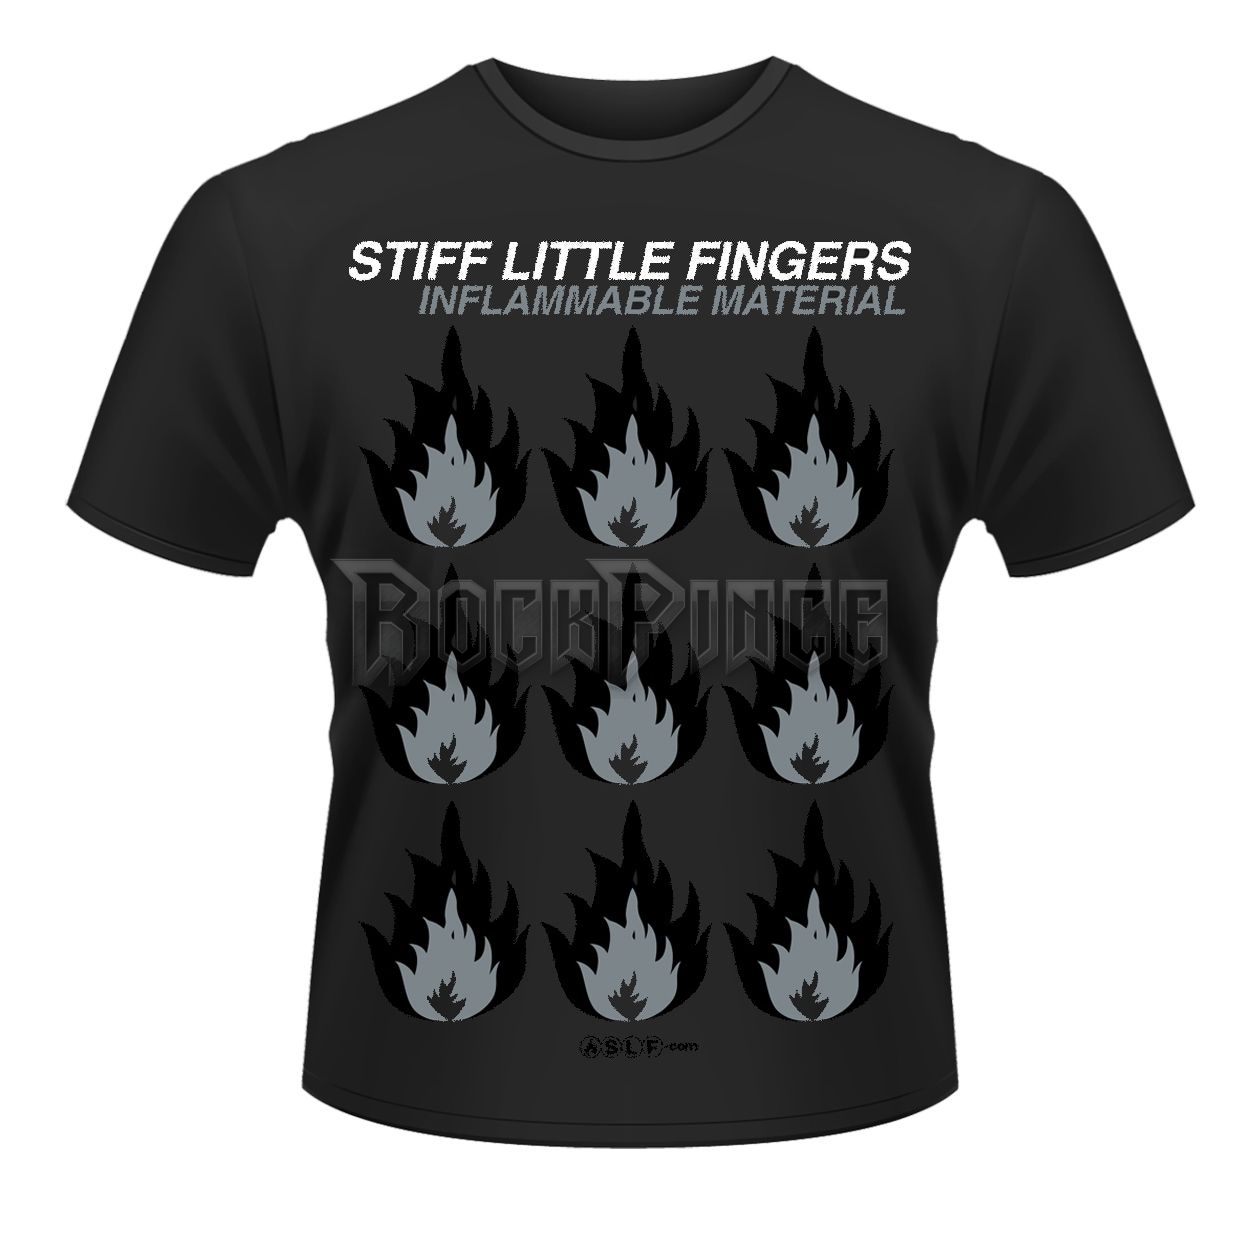 STIFF LITTLE FINGERS - INFLAMMABLE MATERIAL - PH8948